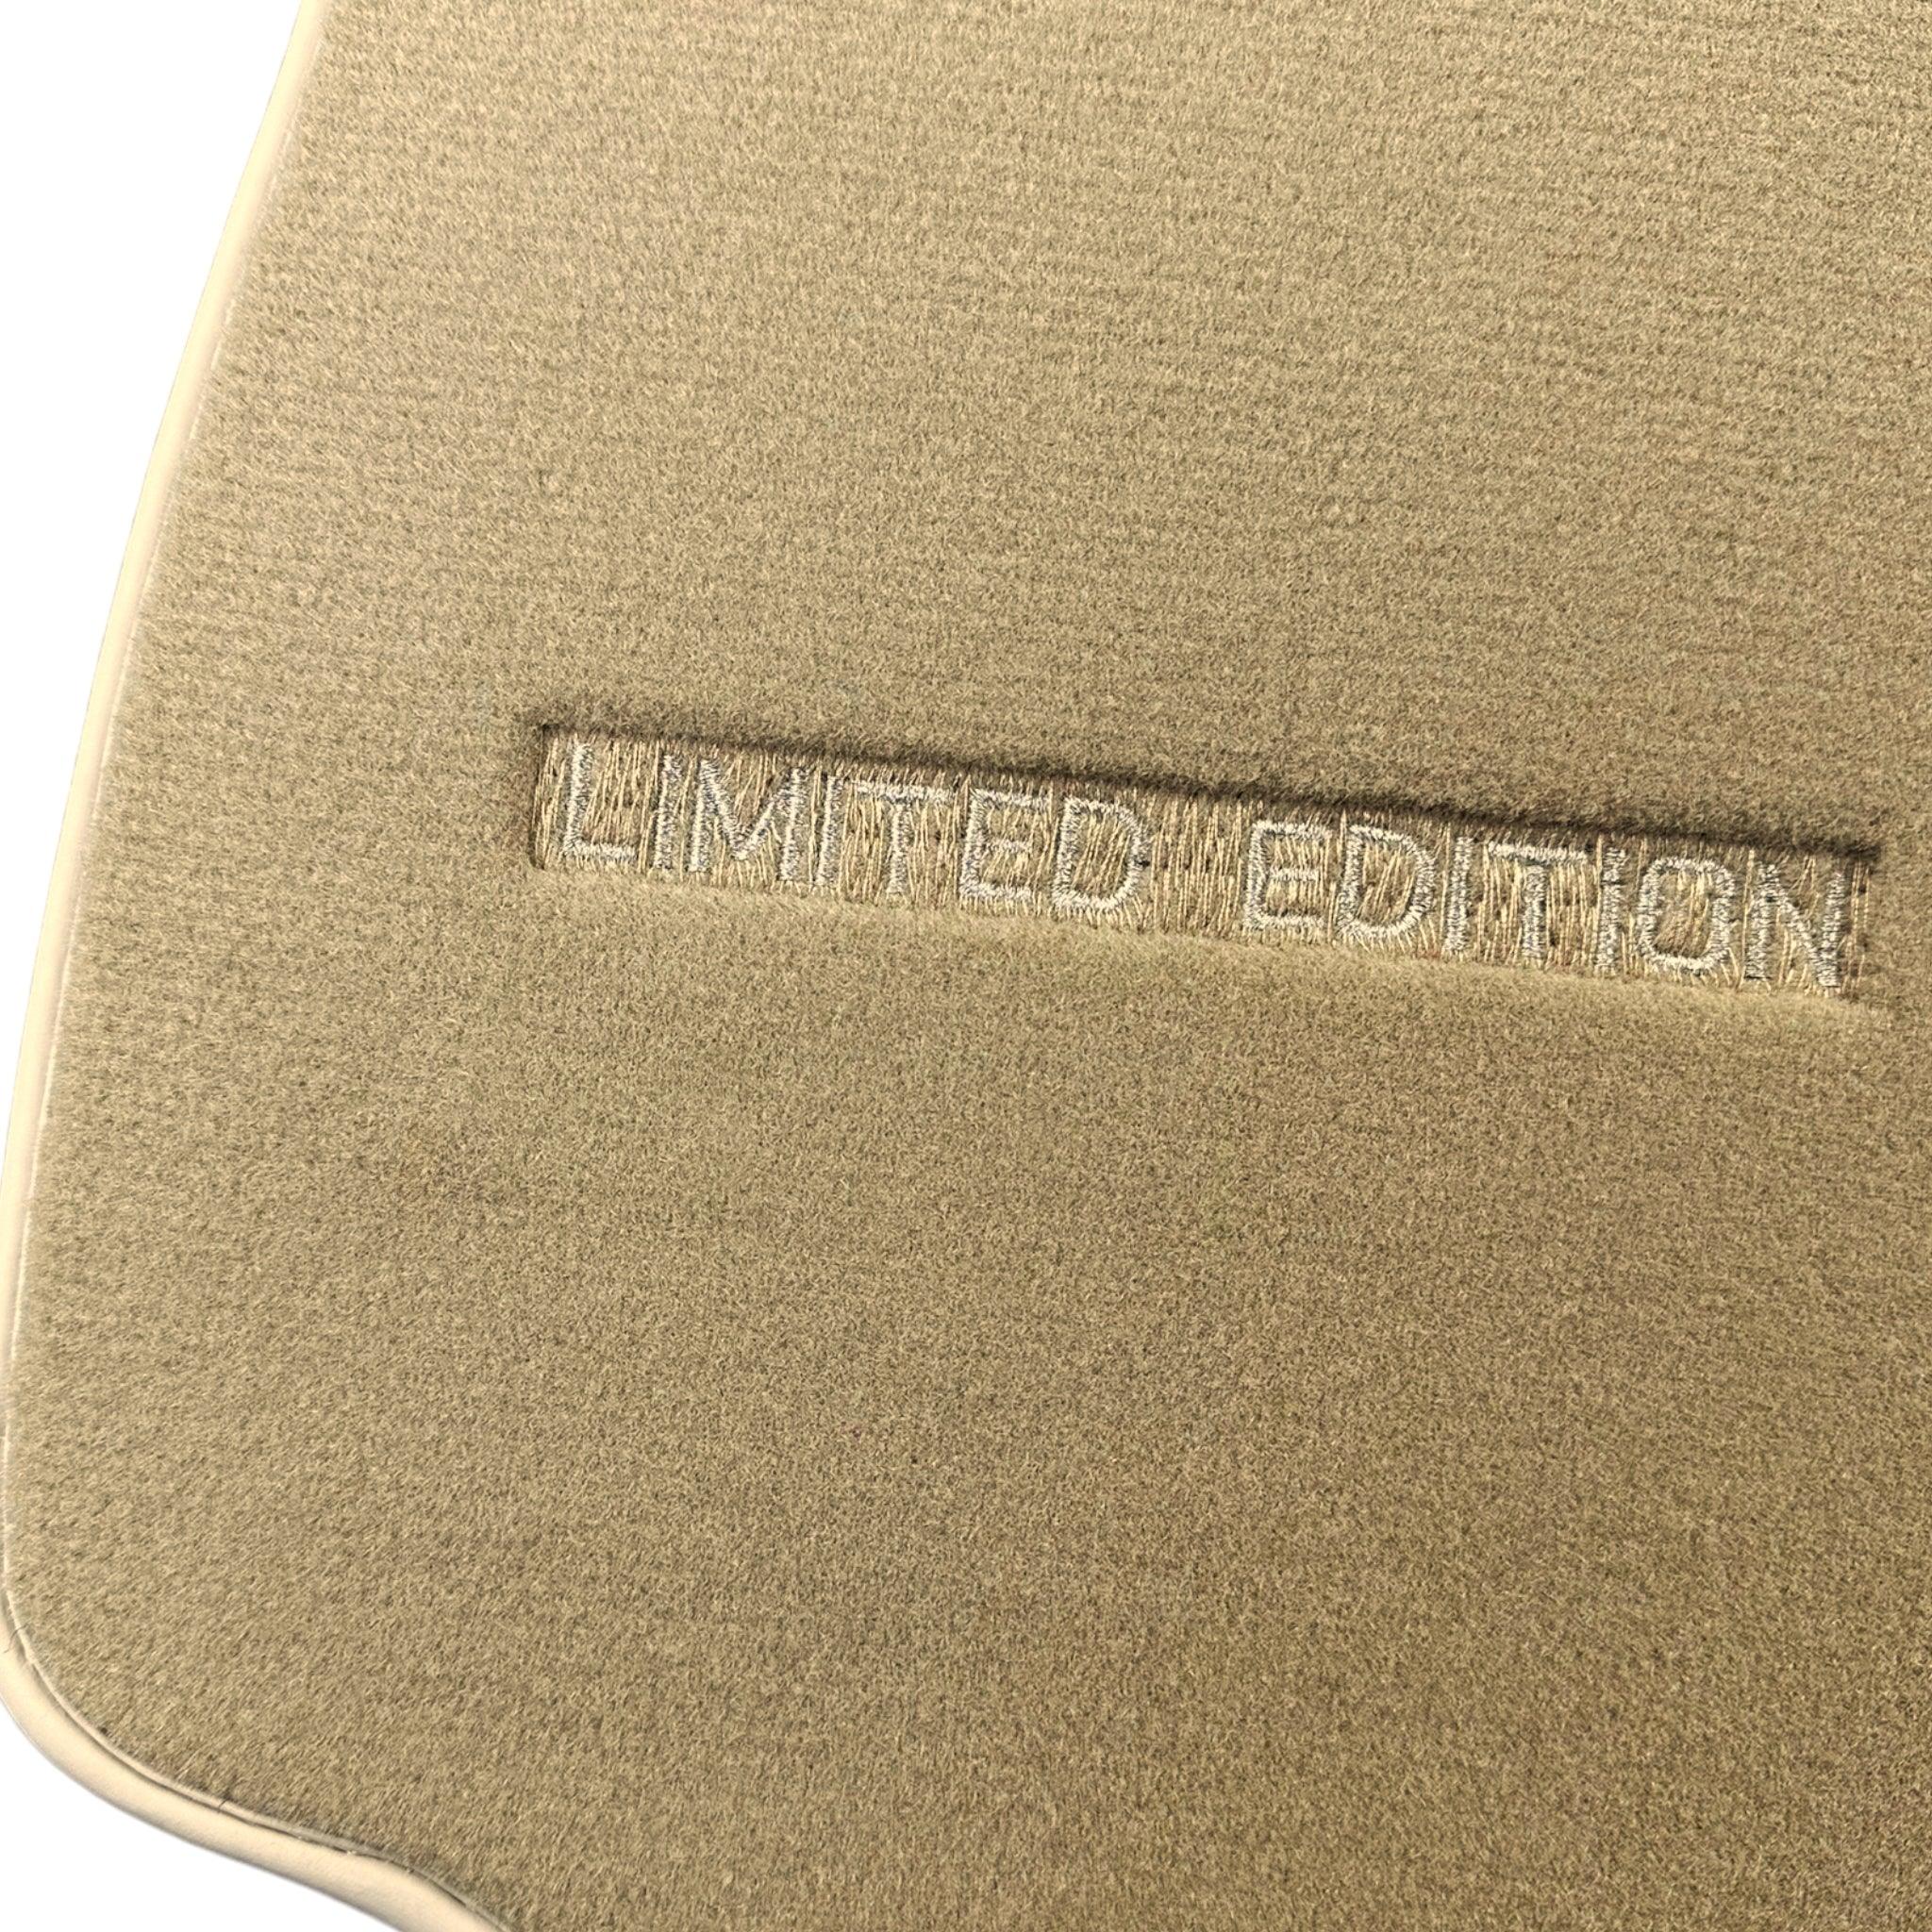 Beige Floor Mats For Mercedes Benz S-Class W140 (1991-1998) | Limited Edition